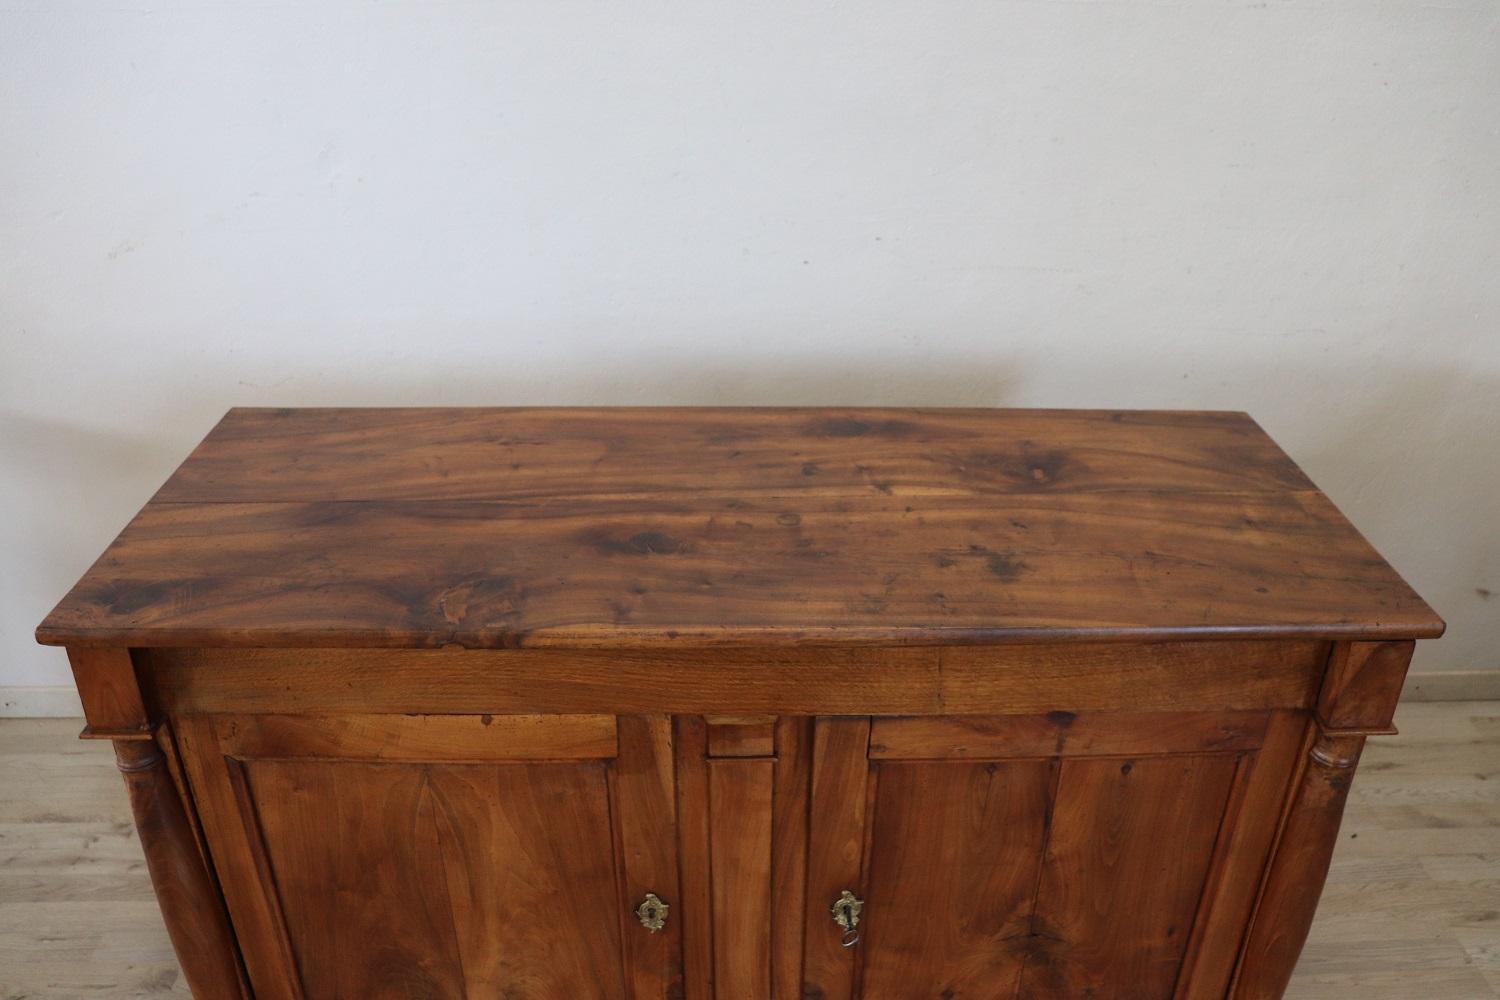 Important and rare antique empire solid walnut sideboard 1810s. Walnut wood has acquired a beautiful antique patina presenting the signs of all the past centuries. The signs of the passage of time on this sideboard top are a merit that certify its